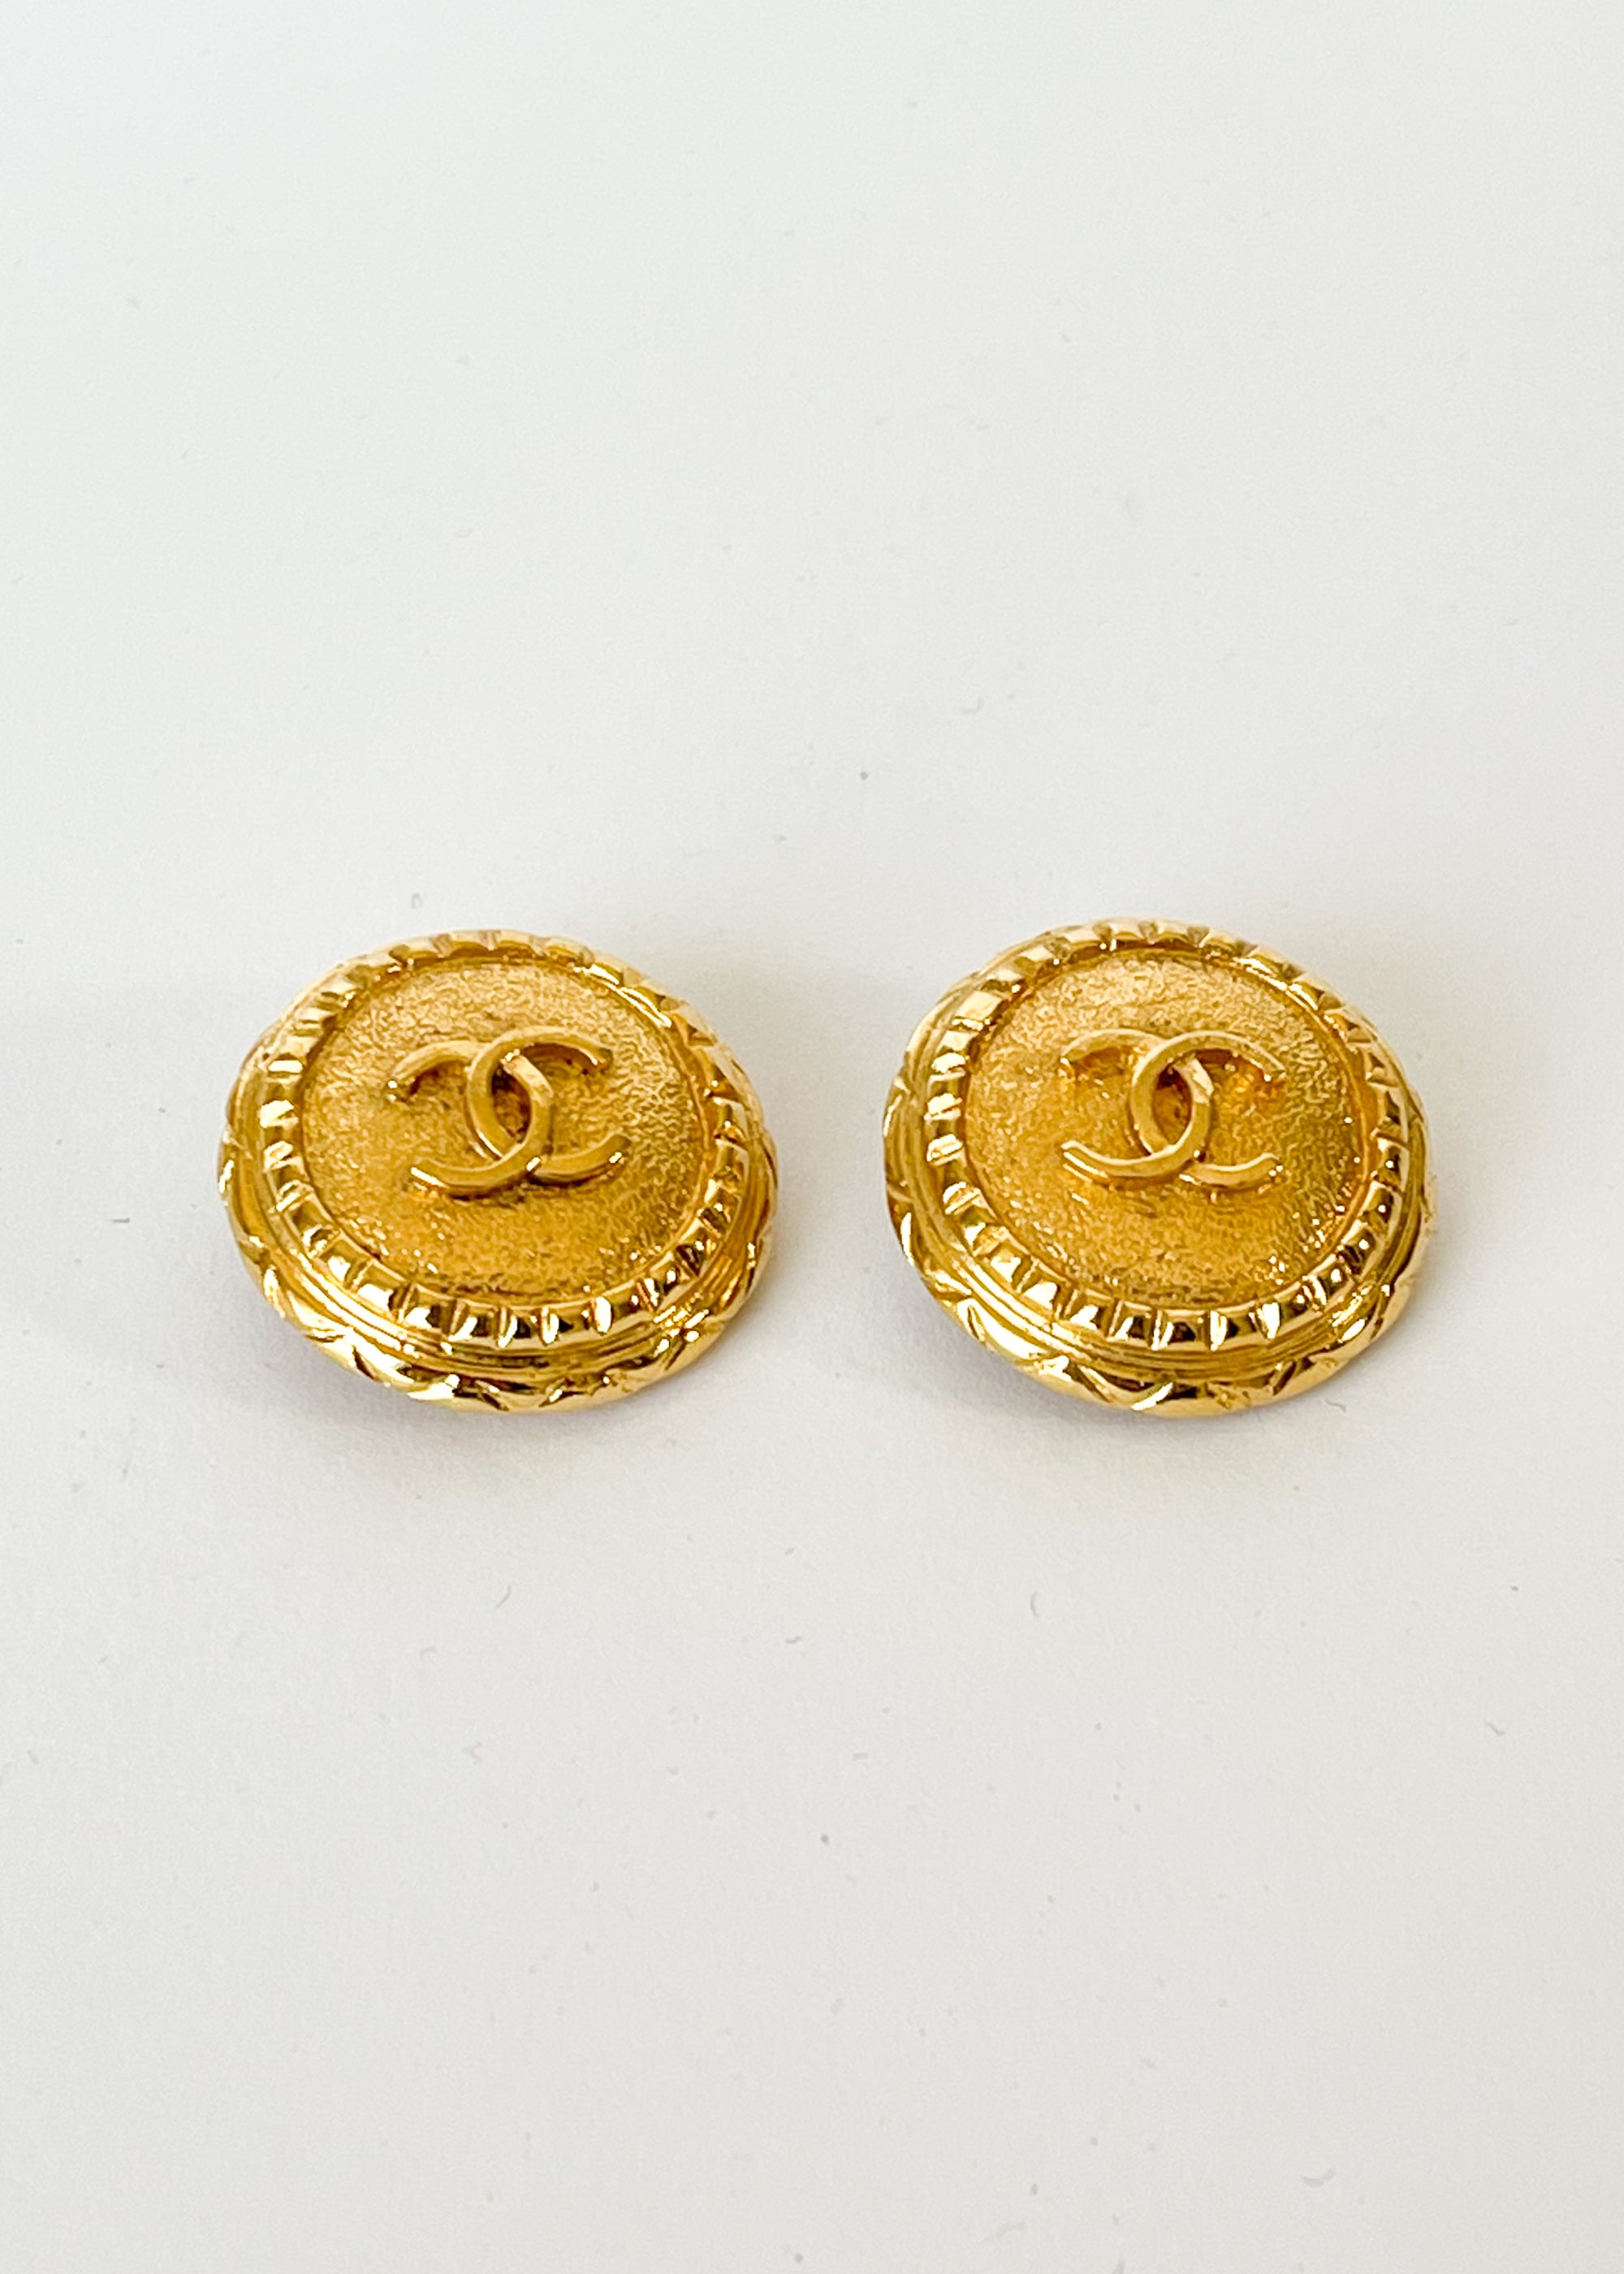 Vintage Chanel Logo Button Earrings - Raleigh Vintage